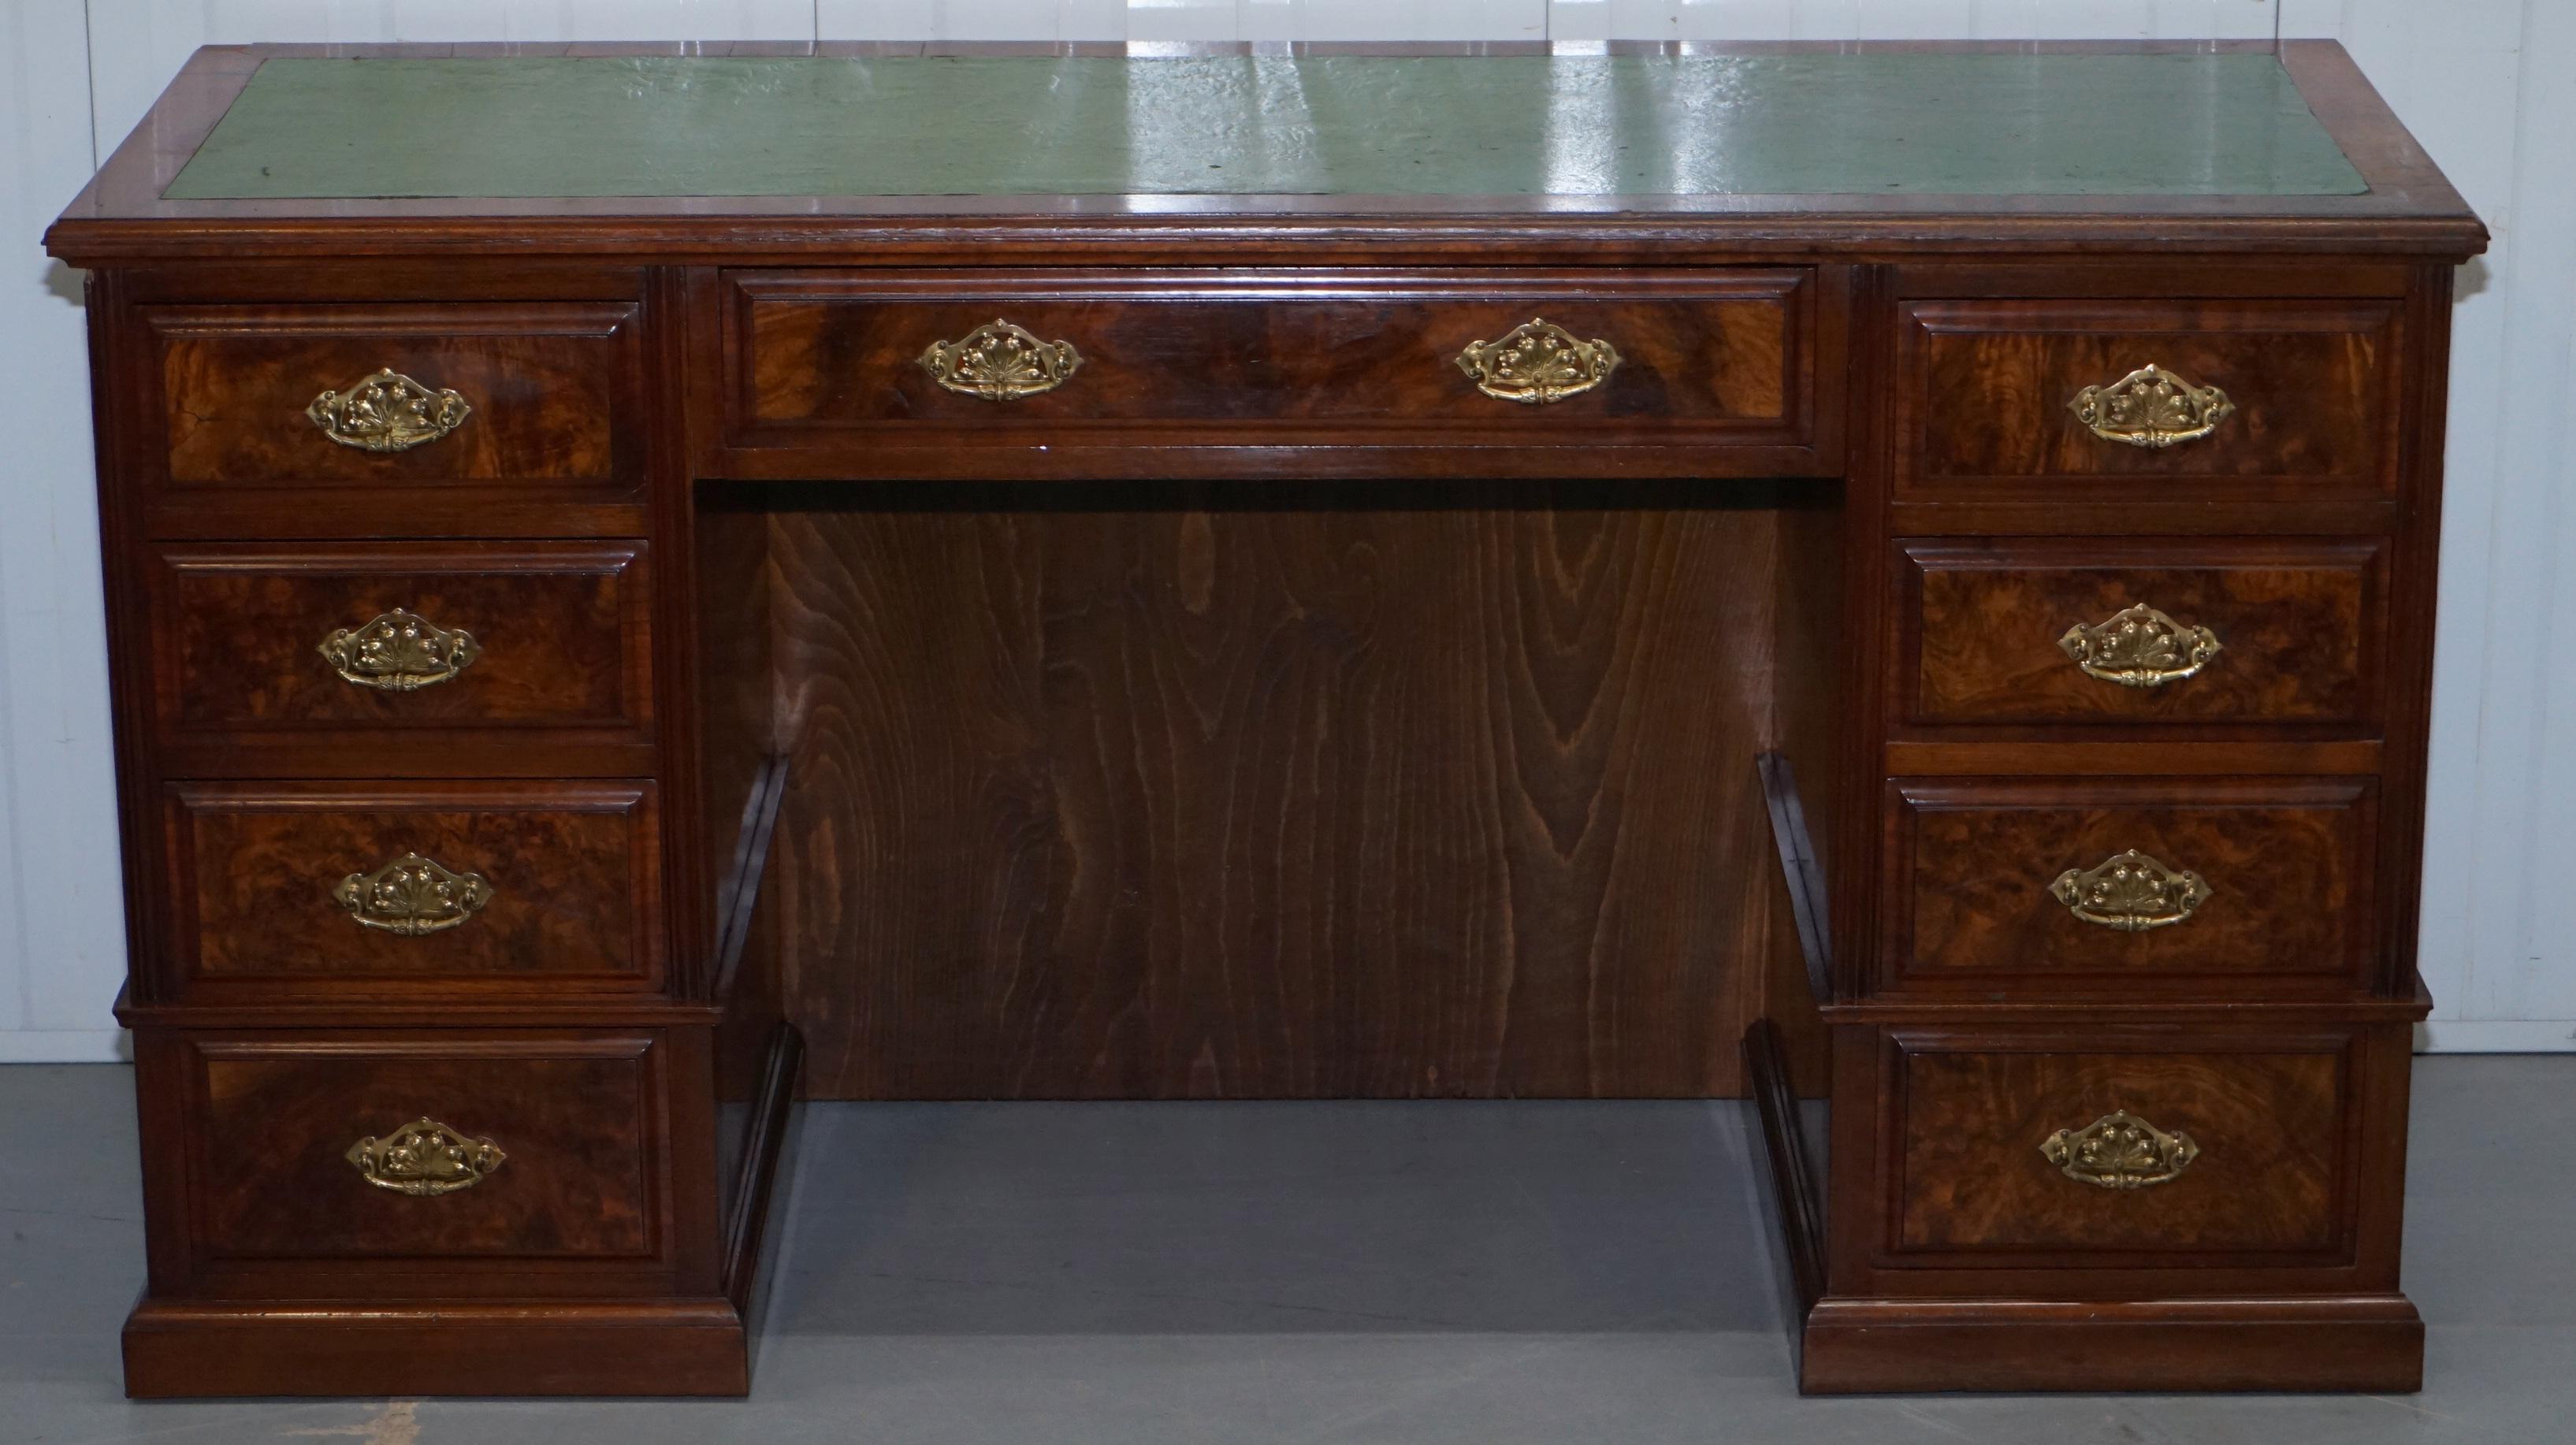 We are delighted to offer for sale this stunning circa 1870 solid walnut twin pedestal oversized knee hole desk

This desk is sublime, the walnut patina on the drawers is rich and warm, its burl or burr walnut so full of swirls and lovely